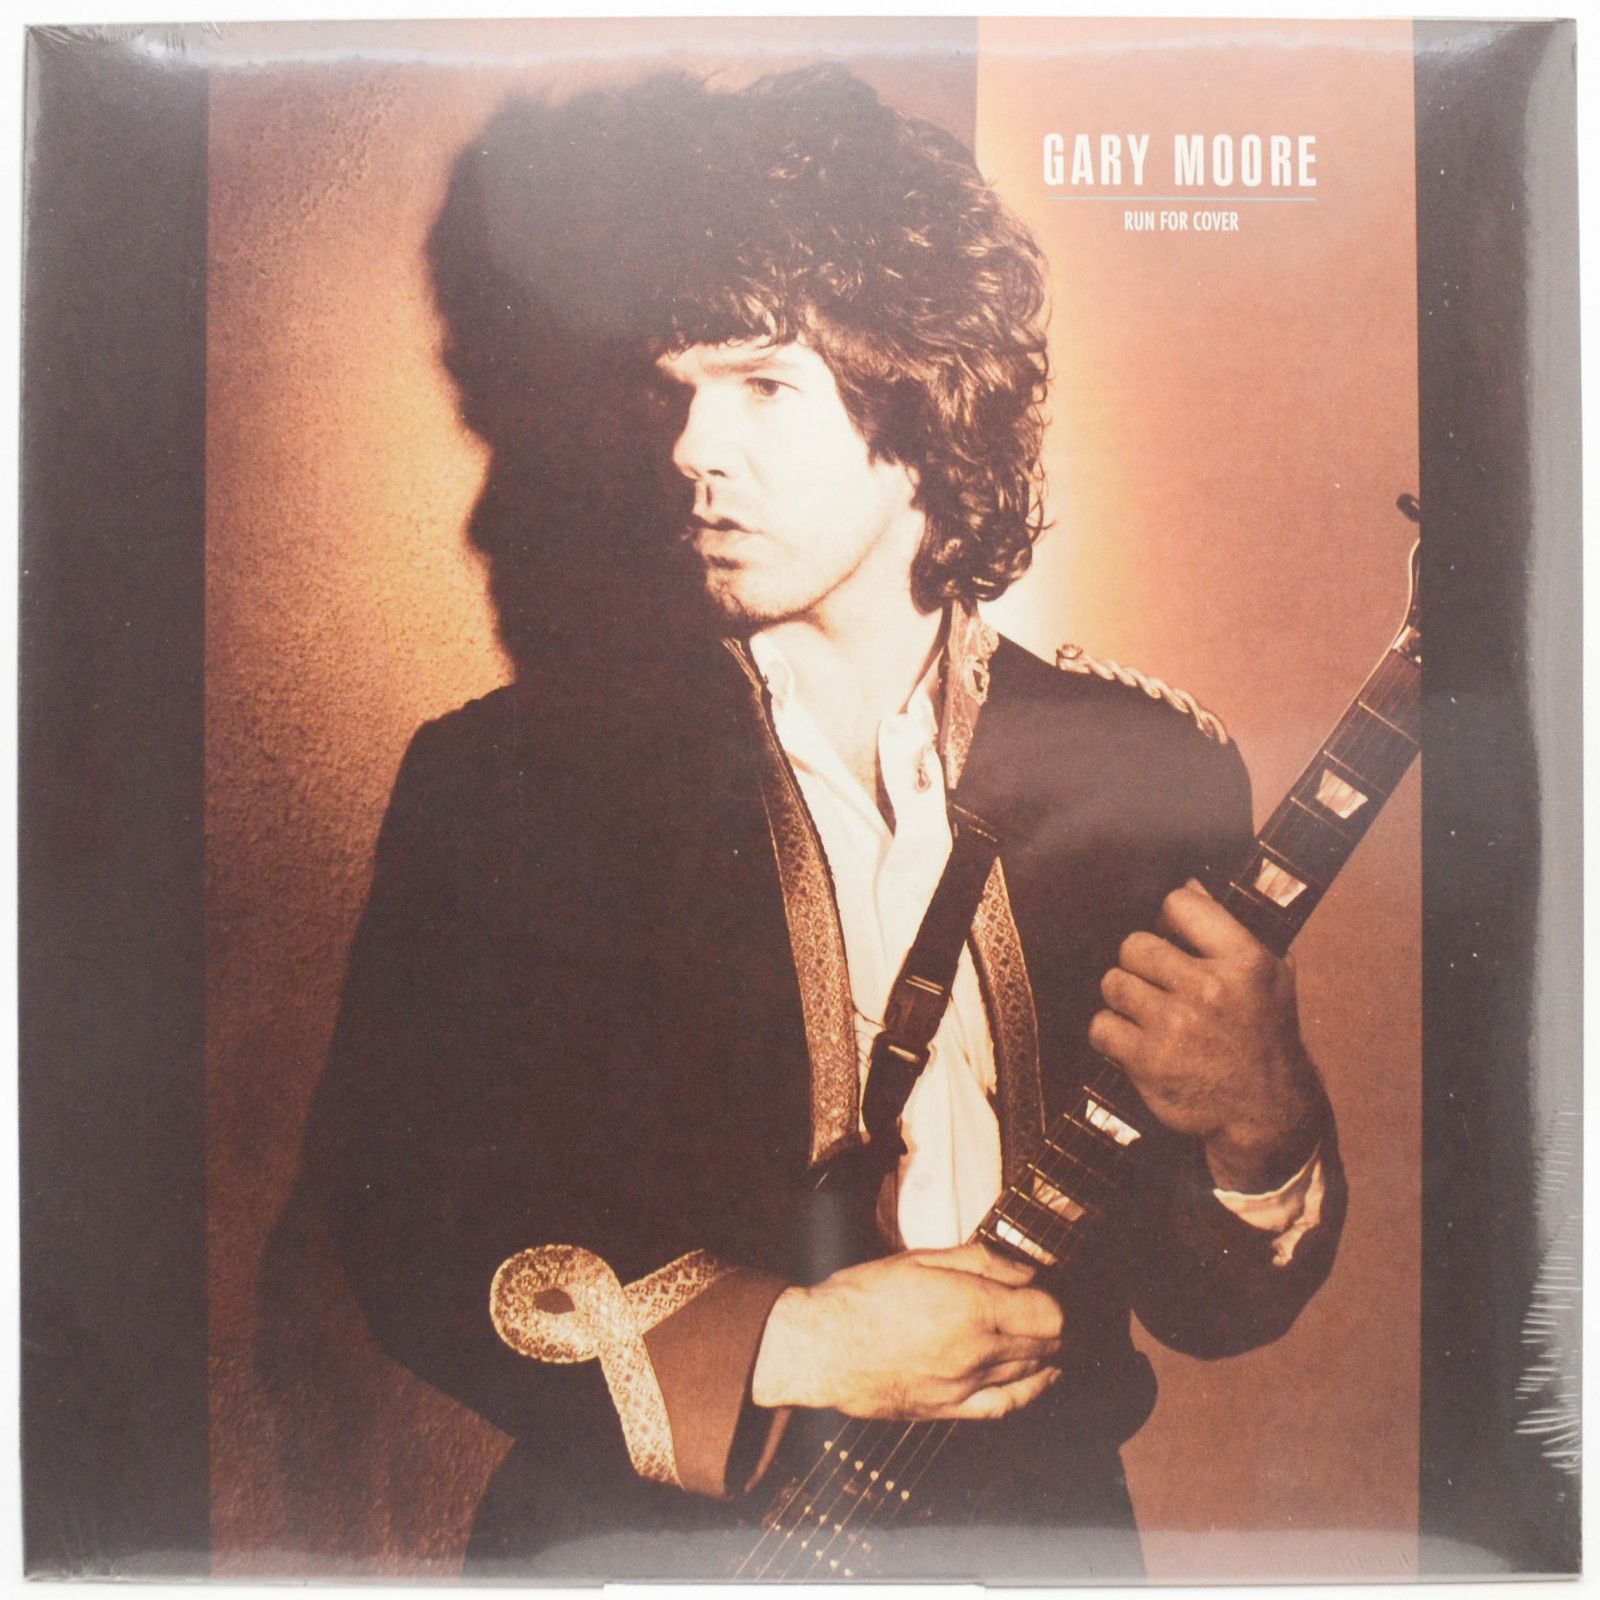 Gary Moore — Run For Cover, 1985